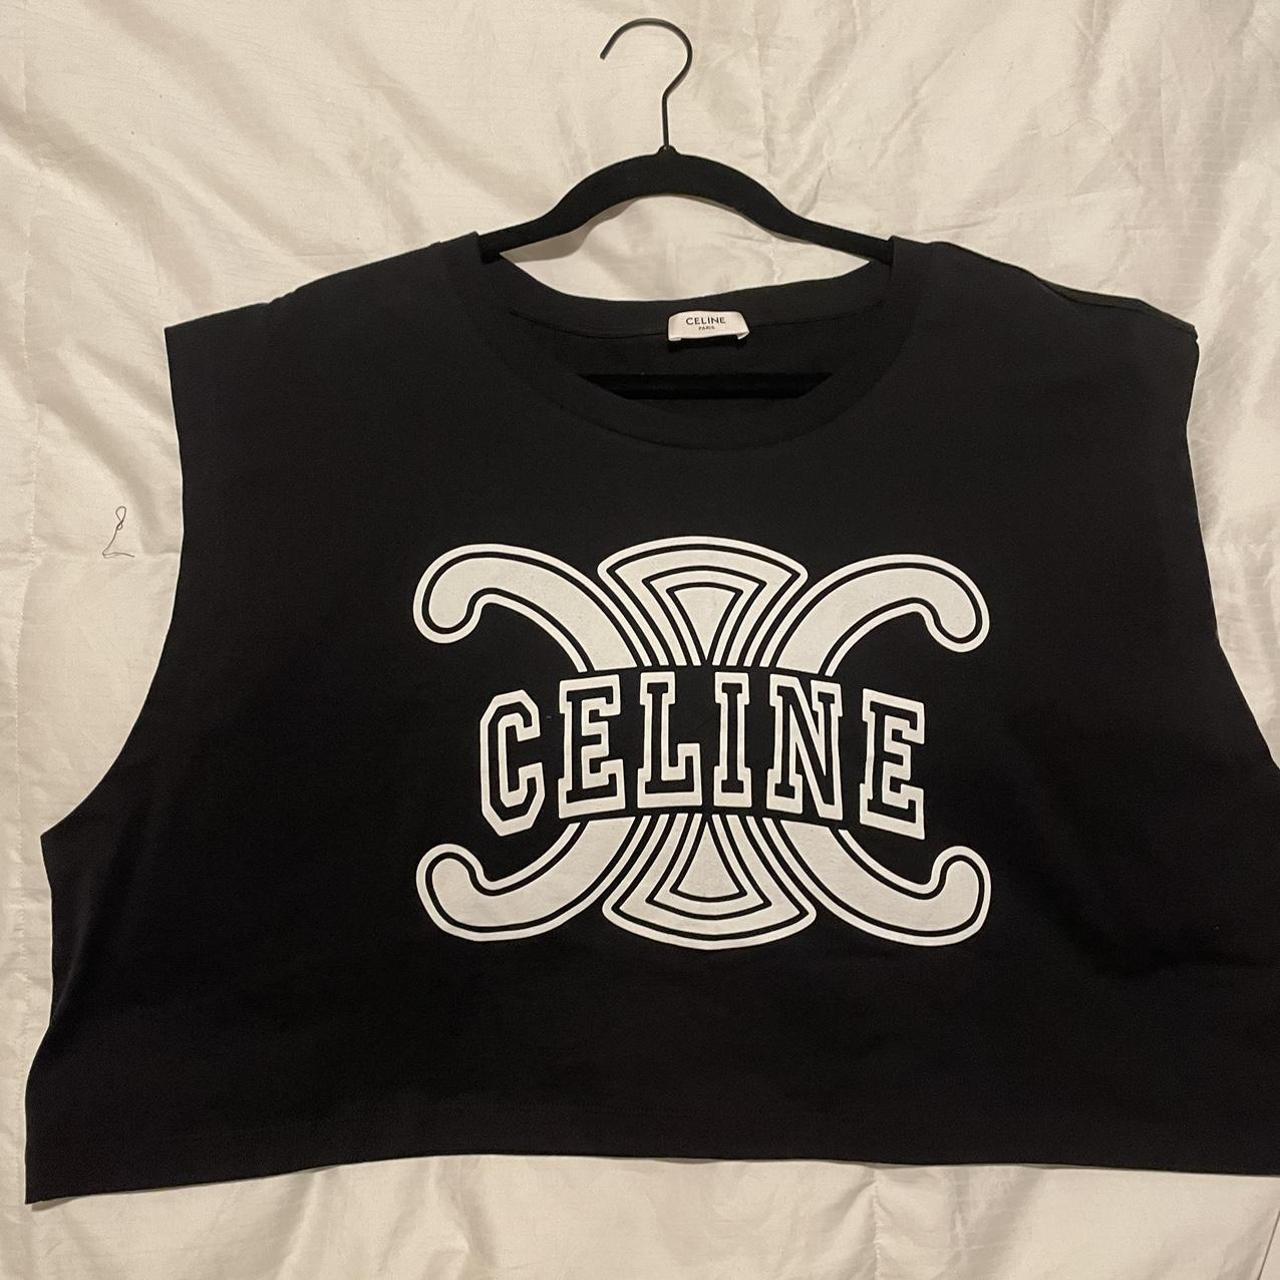 Celine Triomphe Crop top Like New with tags and - Depop